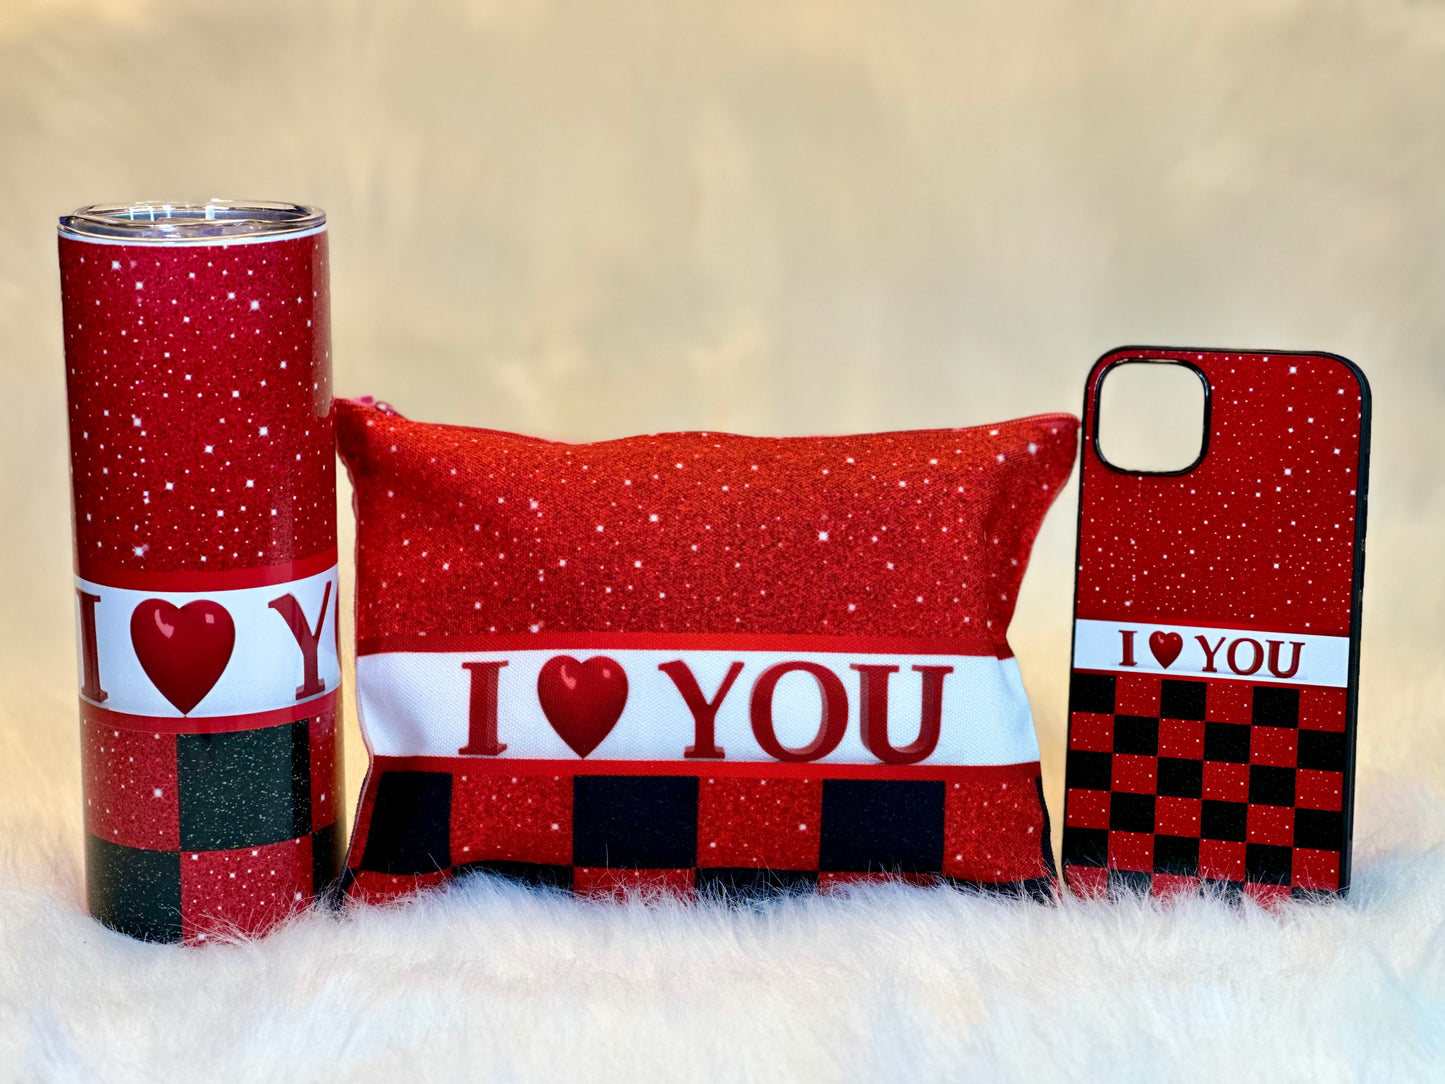 RED & BLACK SHINY I HEART YOU - 20oz TUMBLER+COSMETIC/TOILETRY BAG+iPHOE CASE